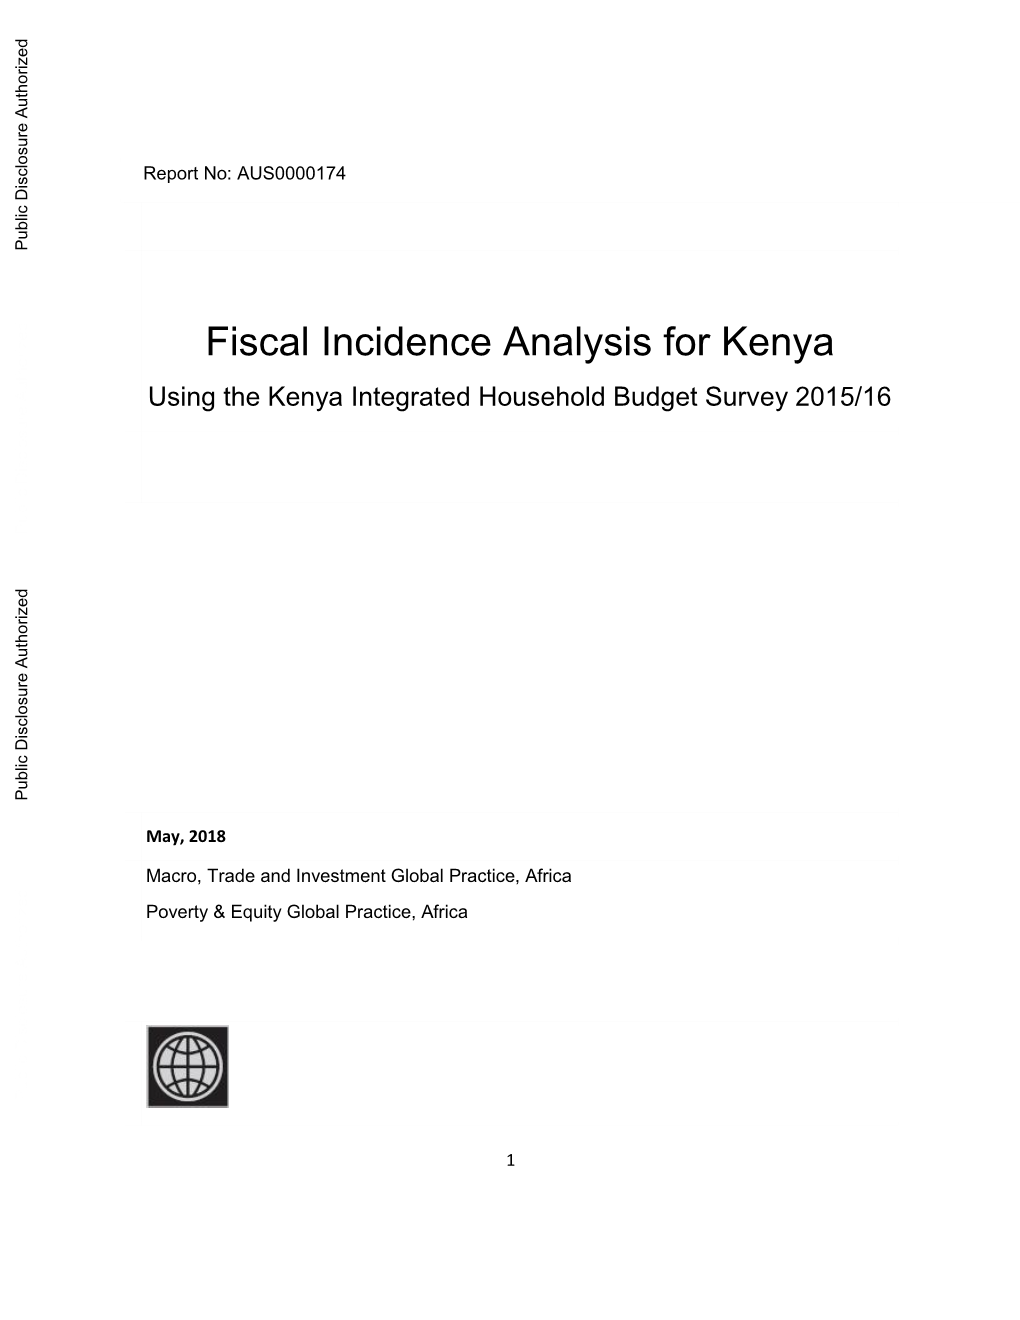 Fiscal Incidence Analysis for Kenya Using the Kenya Integrated Household Budget Survey 2015/16